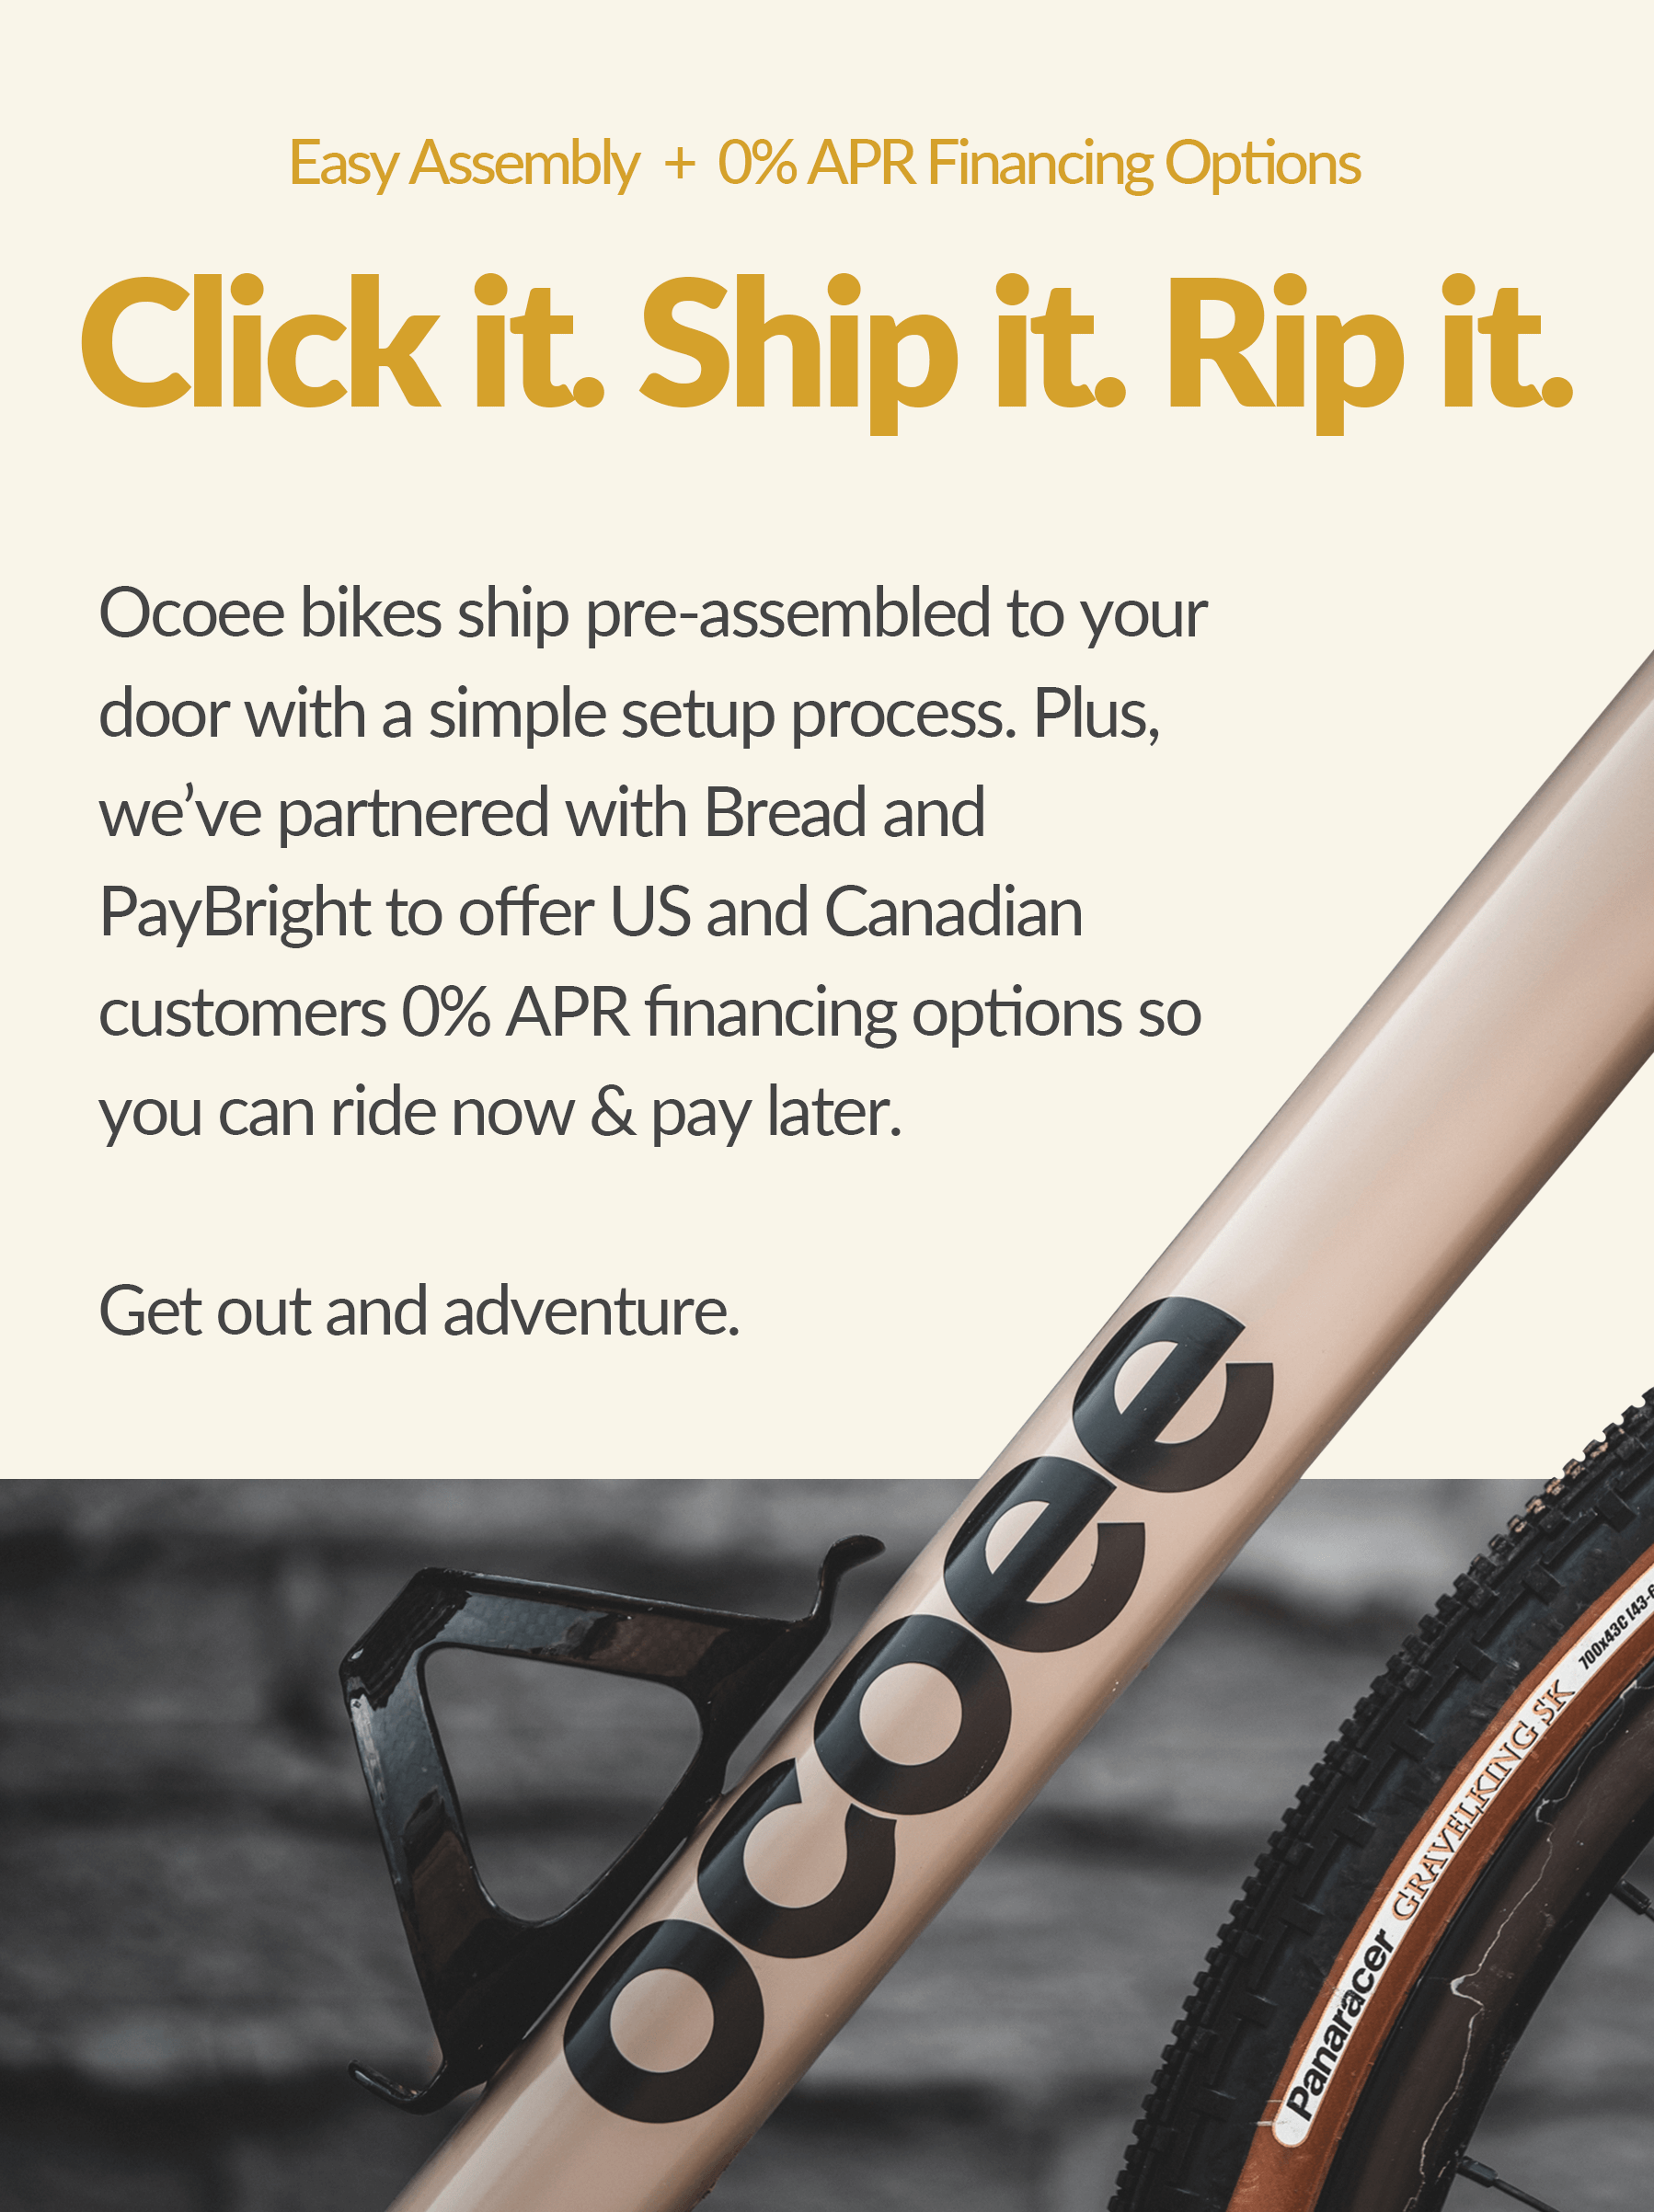 Click it. Ship it. Rip it. Ocoee bikes ship pre-assembled to your door. Plus, take advantage of financing!